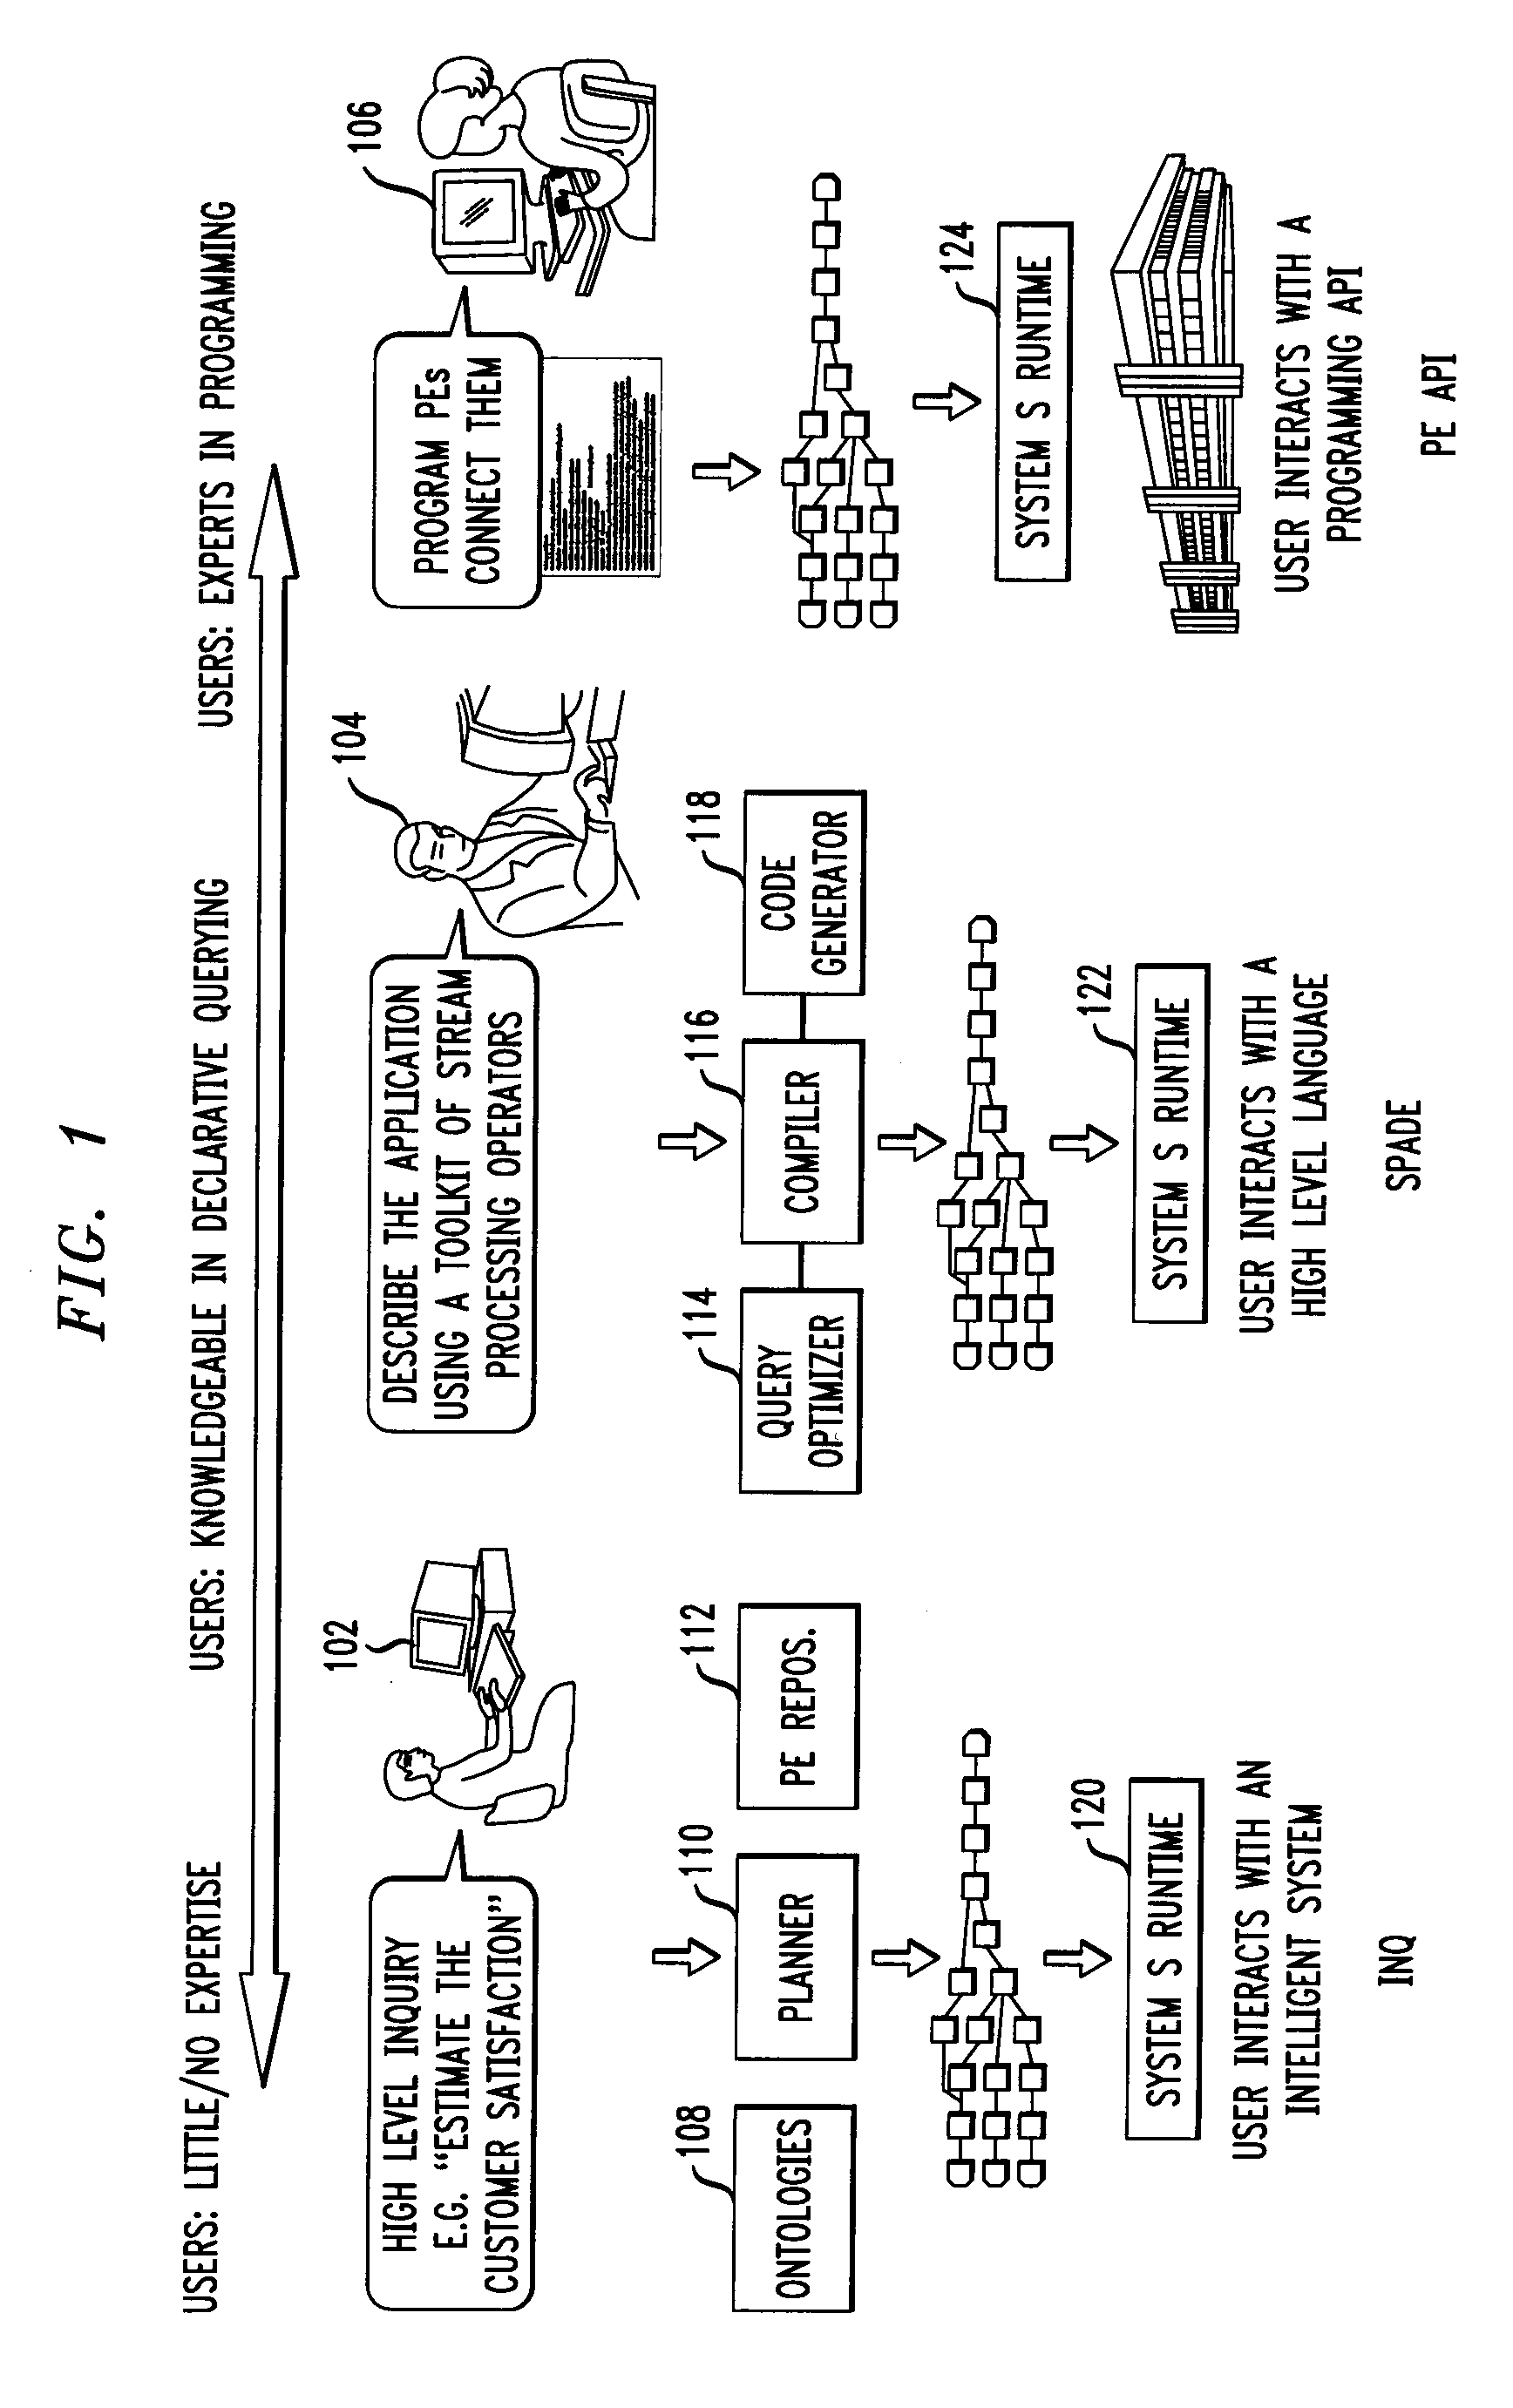 Generating a Distributed Stream Processing Application